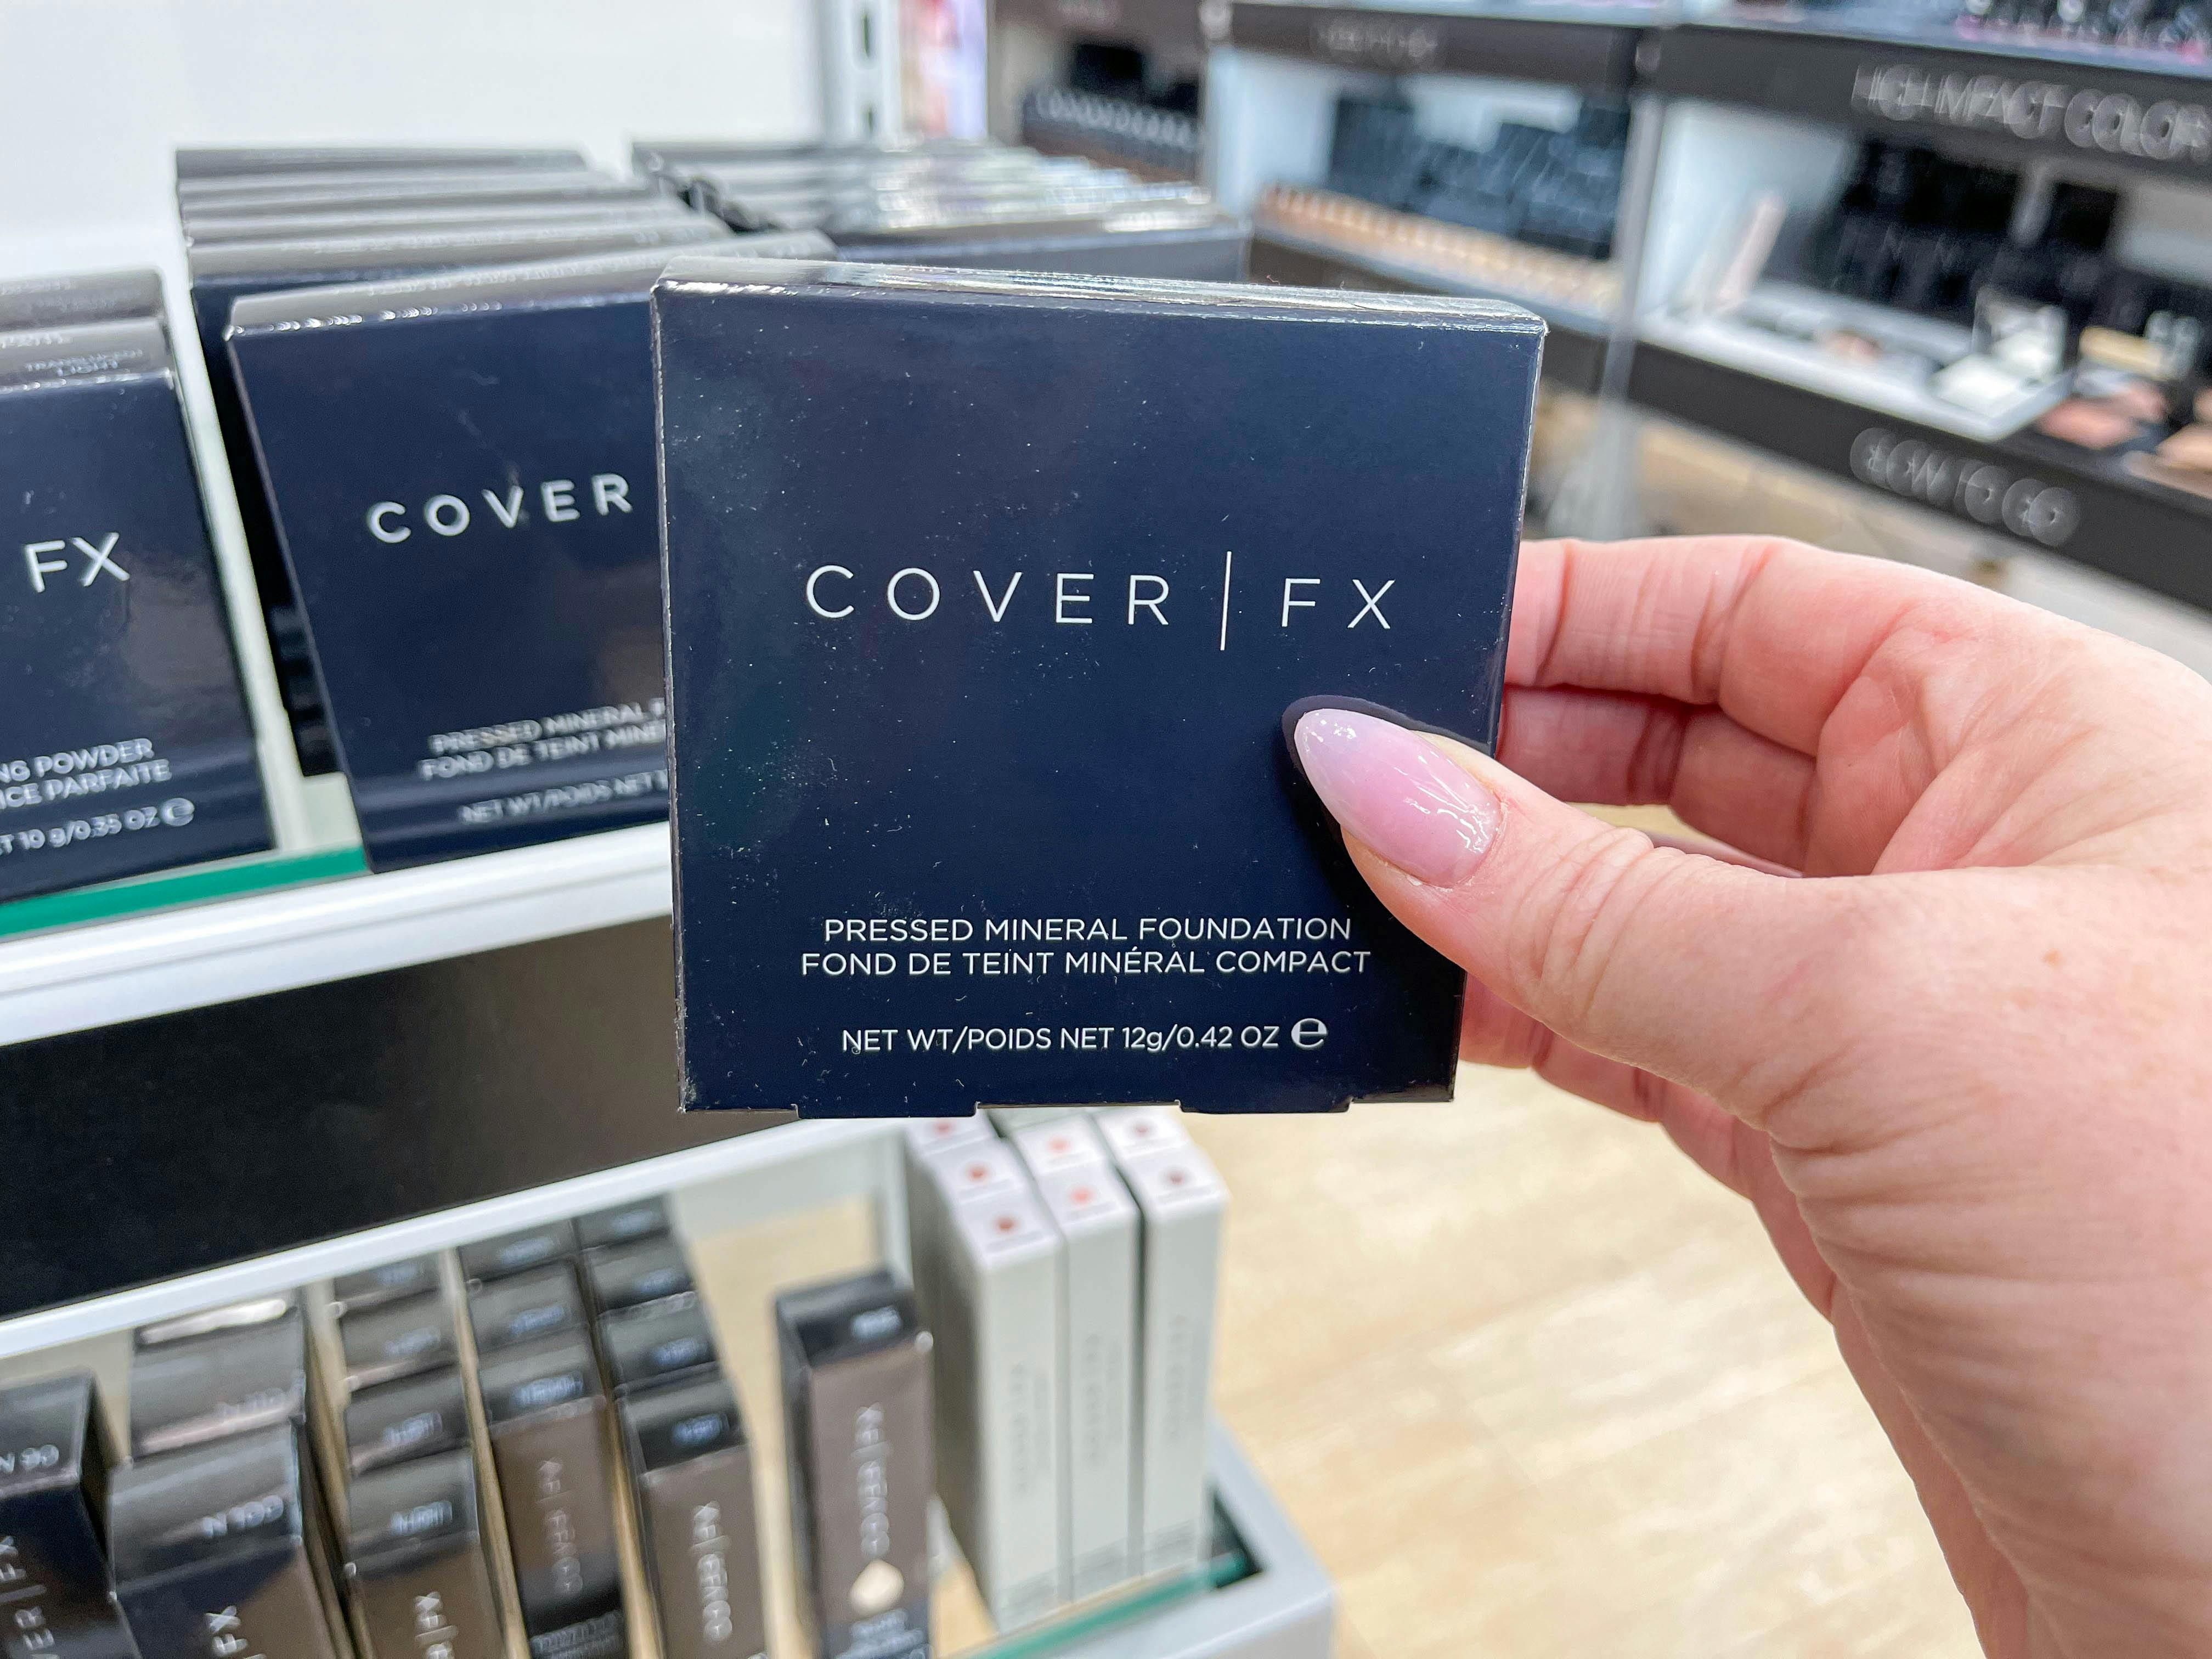 cover fx products on sale in ulta store